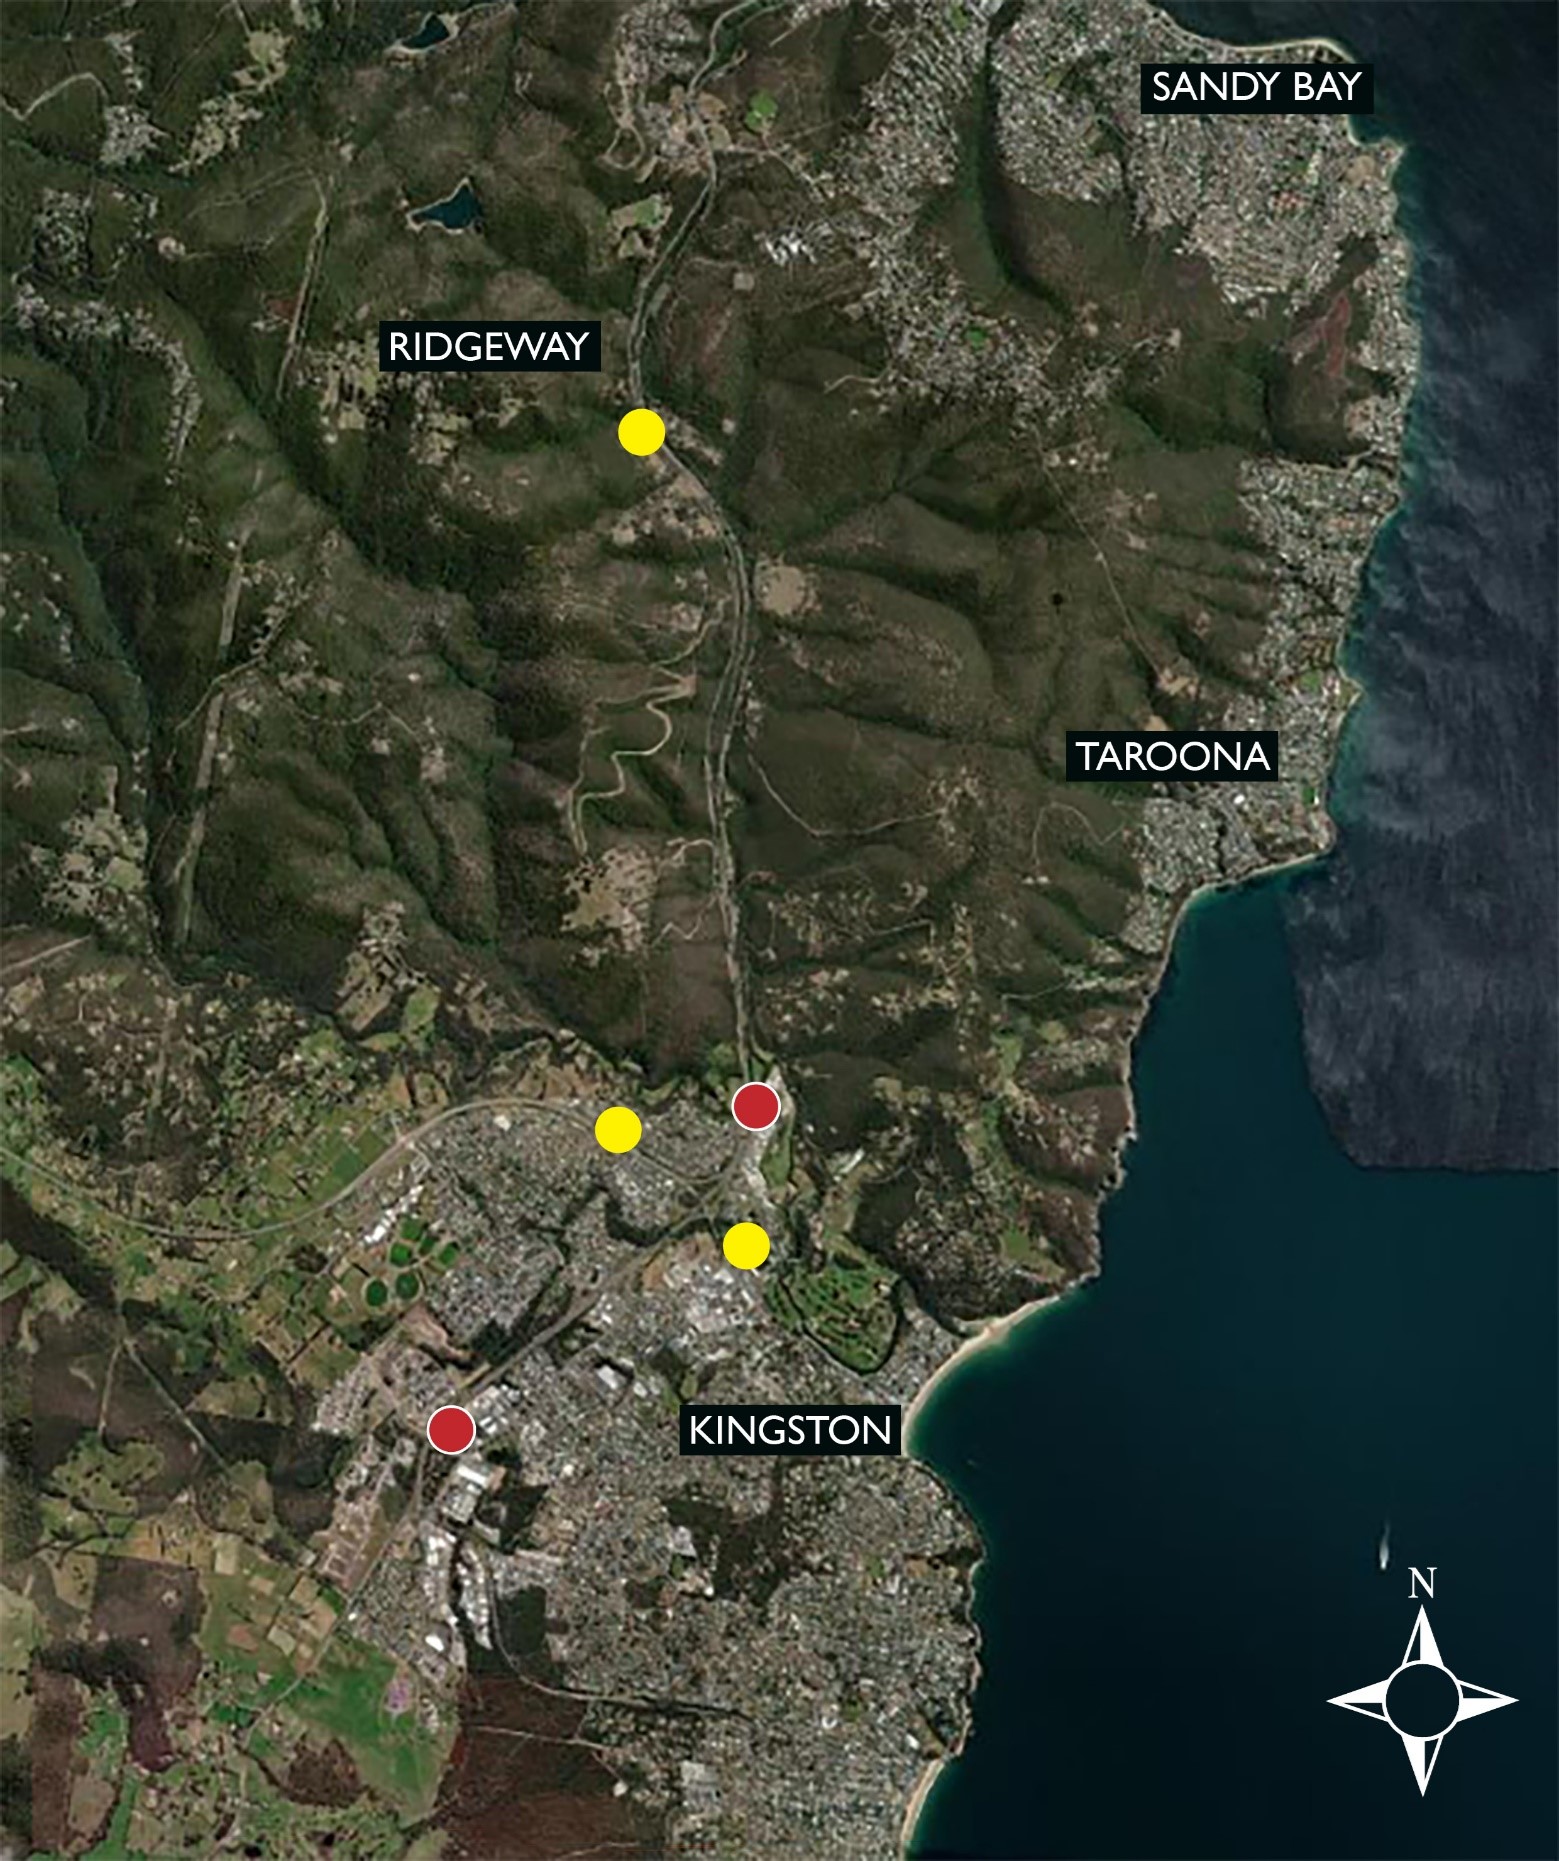 VMS and CCTV Locations south of Hobart